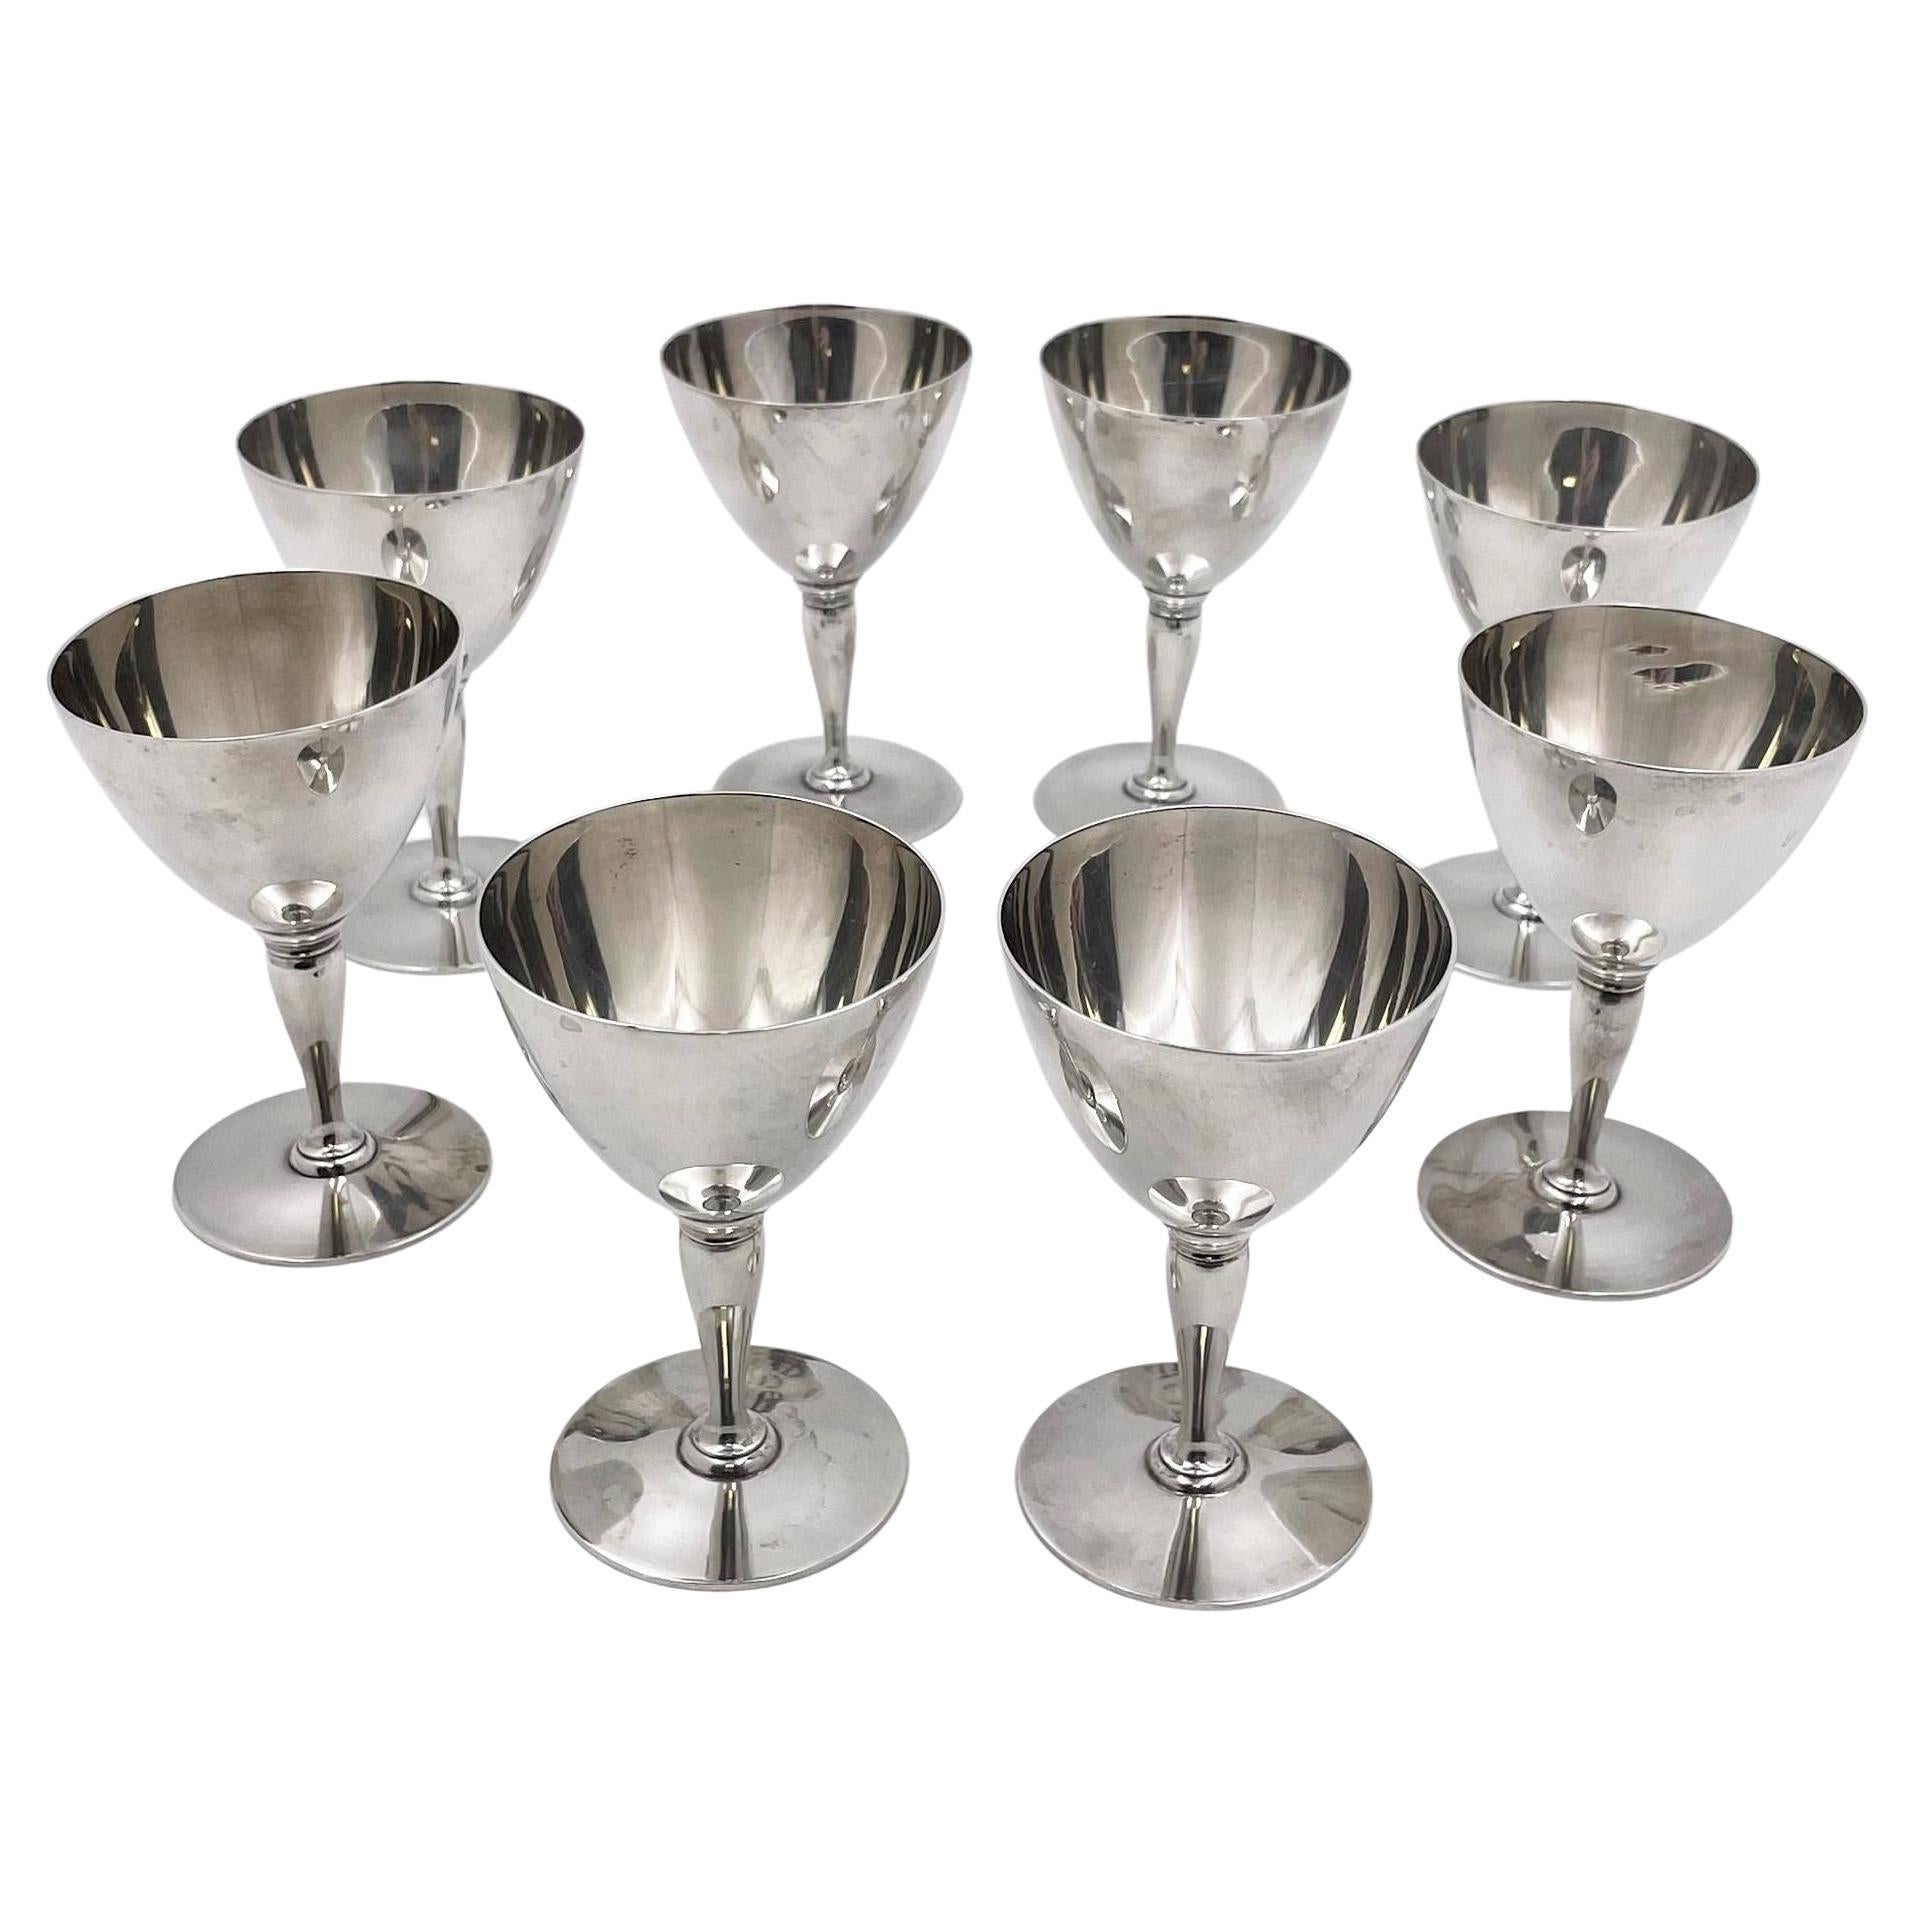 Tiffany & Co. Sterling Silver 1915 Set of 8 Goblets in Art Deco Style